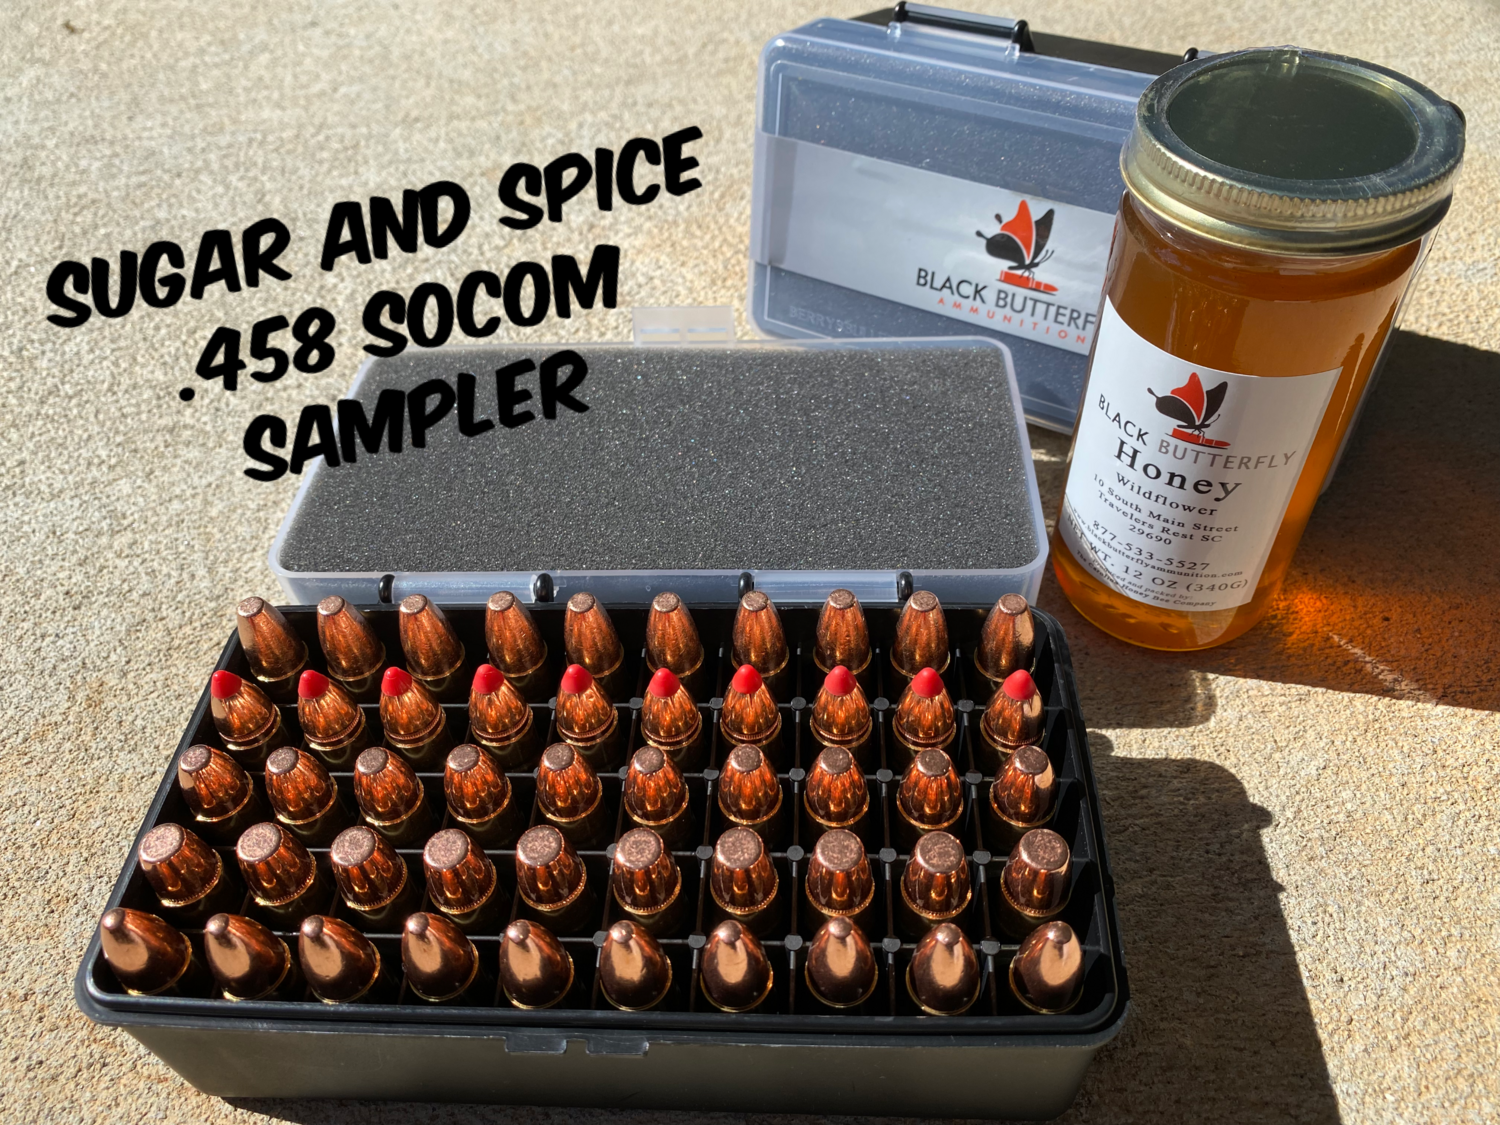 Black Butterfly Ammunition Premium, .458 SOCOM, 50 Rounds, SUGAR AND SPICE &quot;SUPER 10&quot; SAMPLER BOX